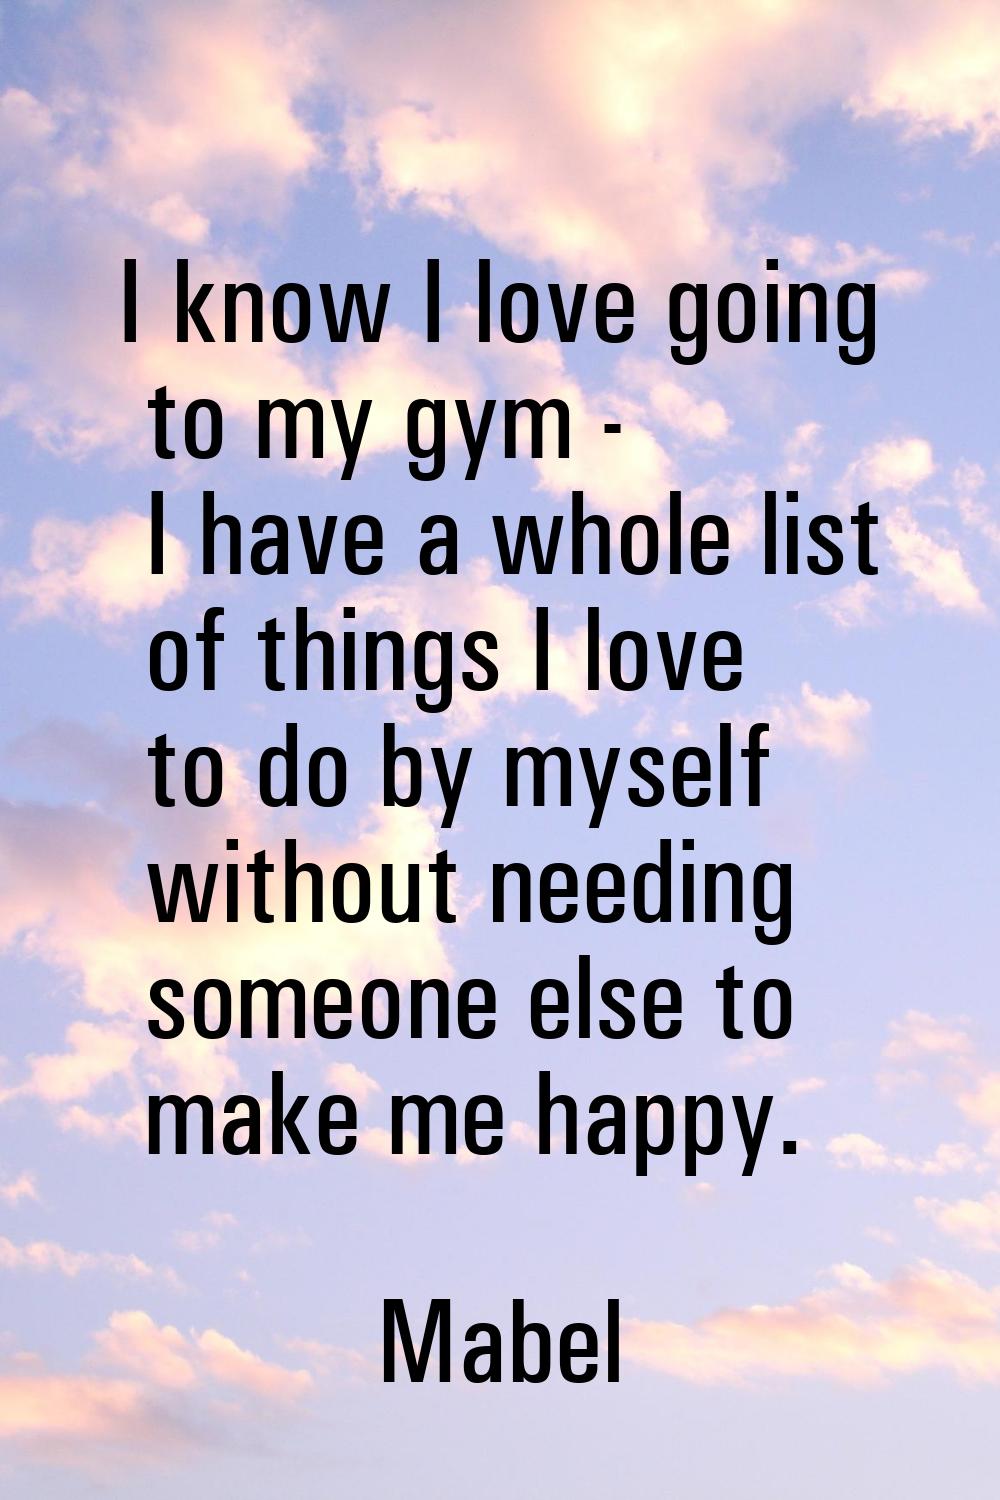 I know I love going to my gym - I have a whole list of things I love to do by myself without needin